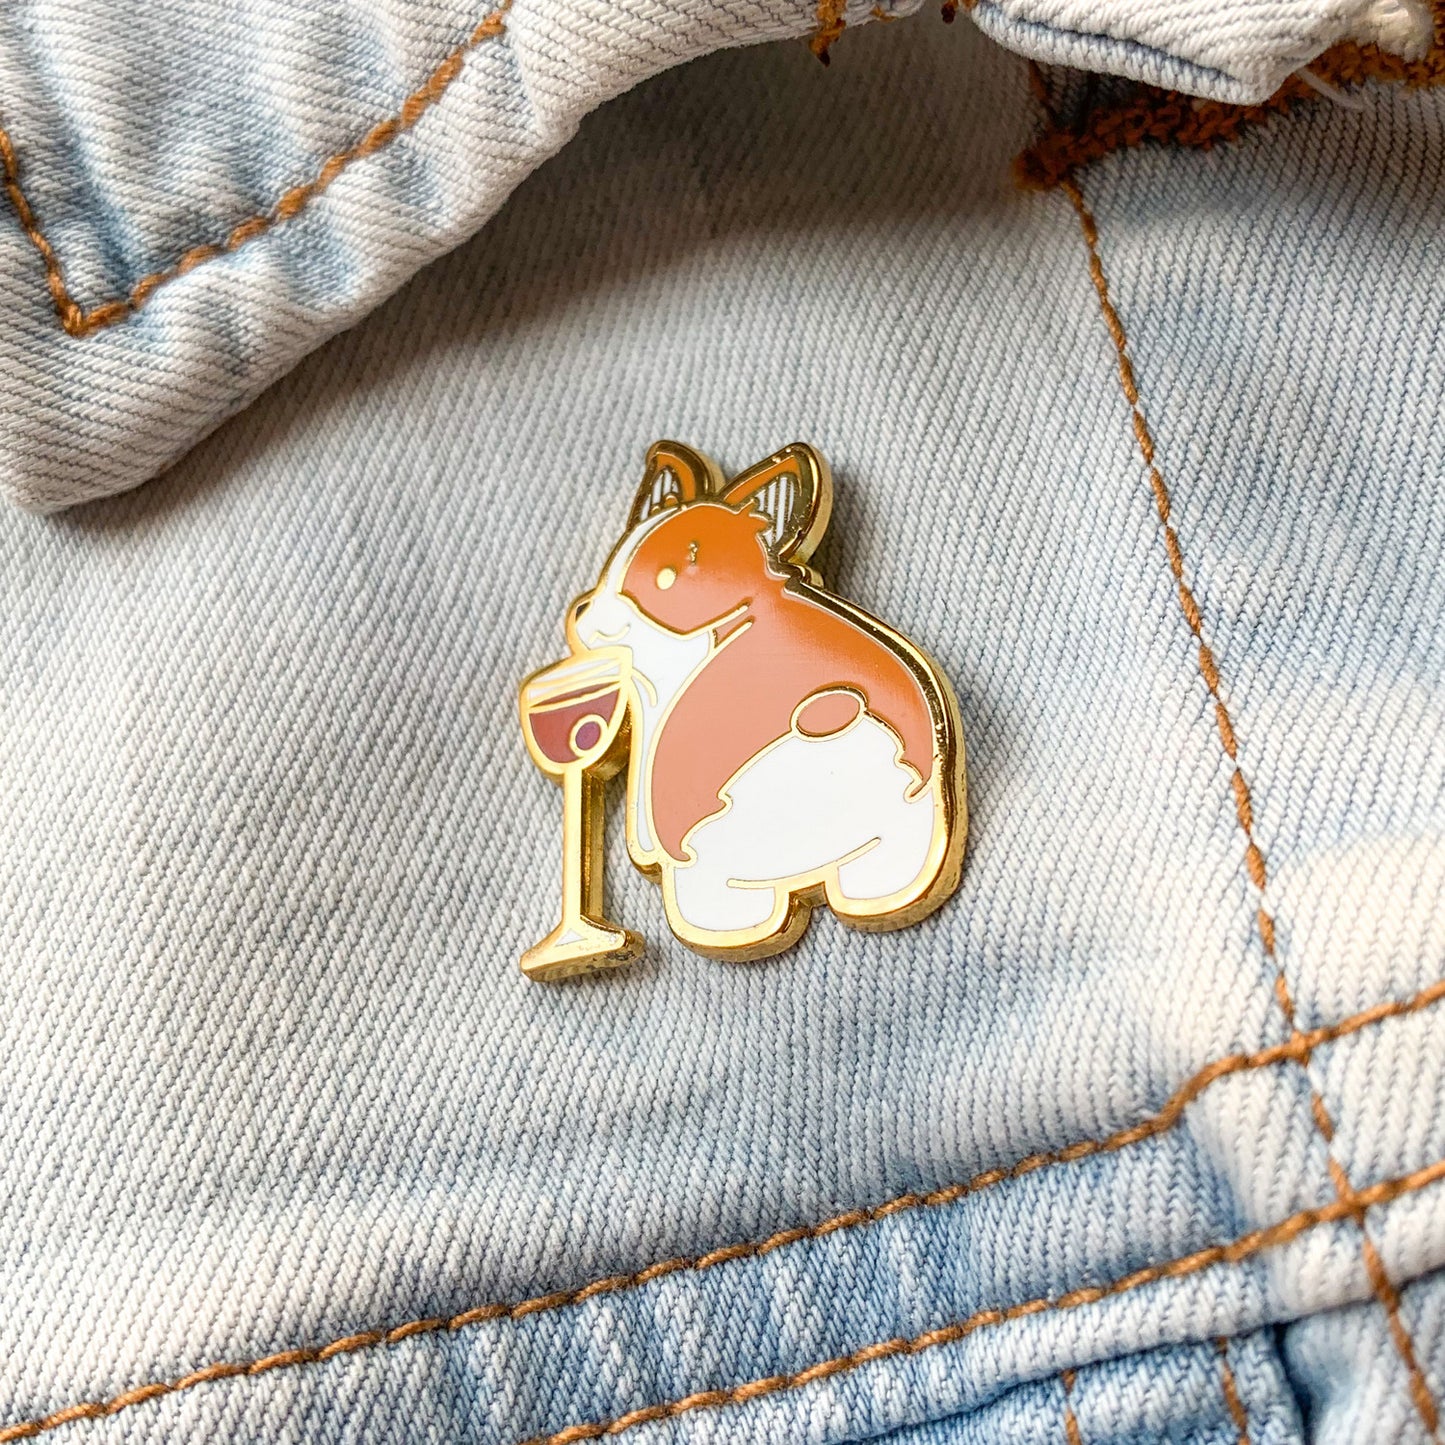 Corgi and Manhattan Cocktail Hard Enamel Pin by Cocktail Critters on Denim